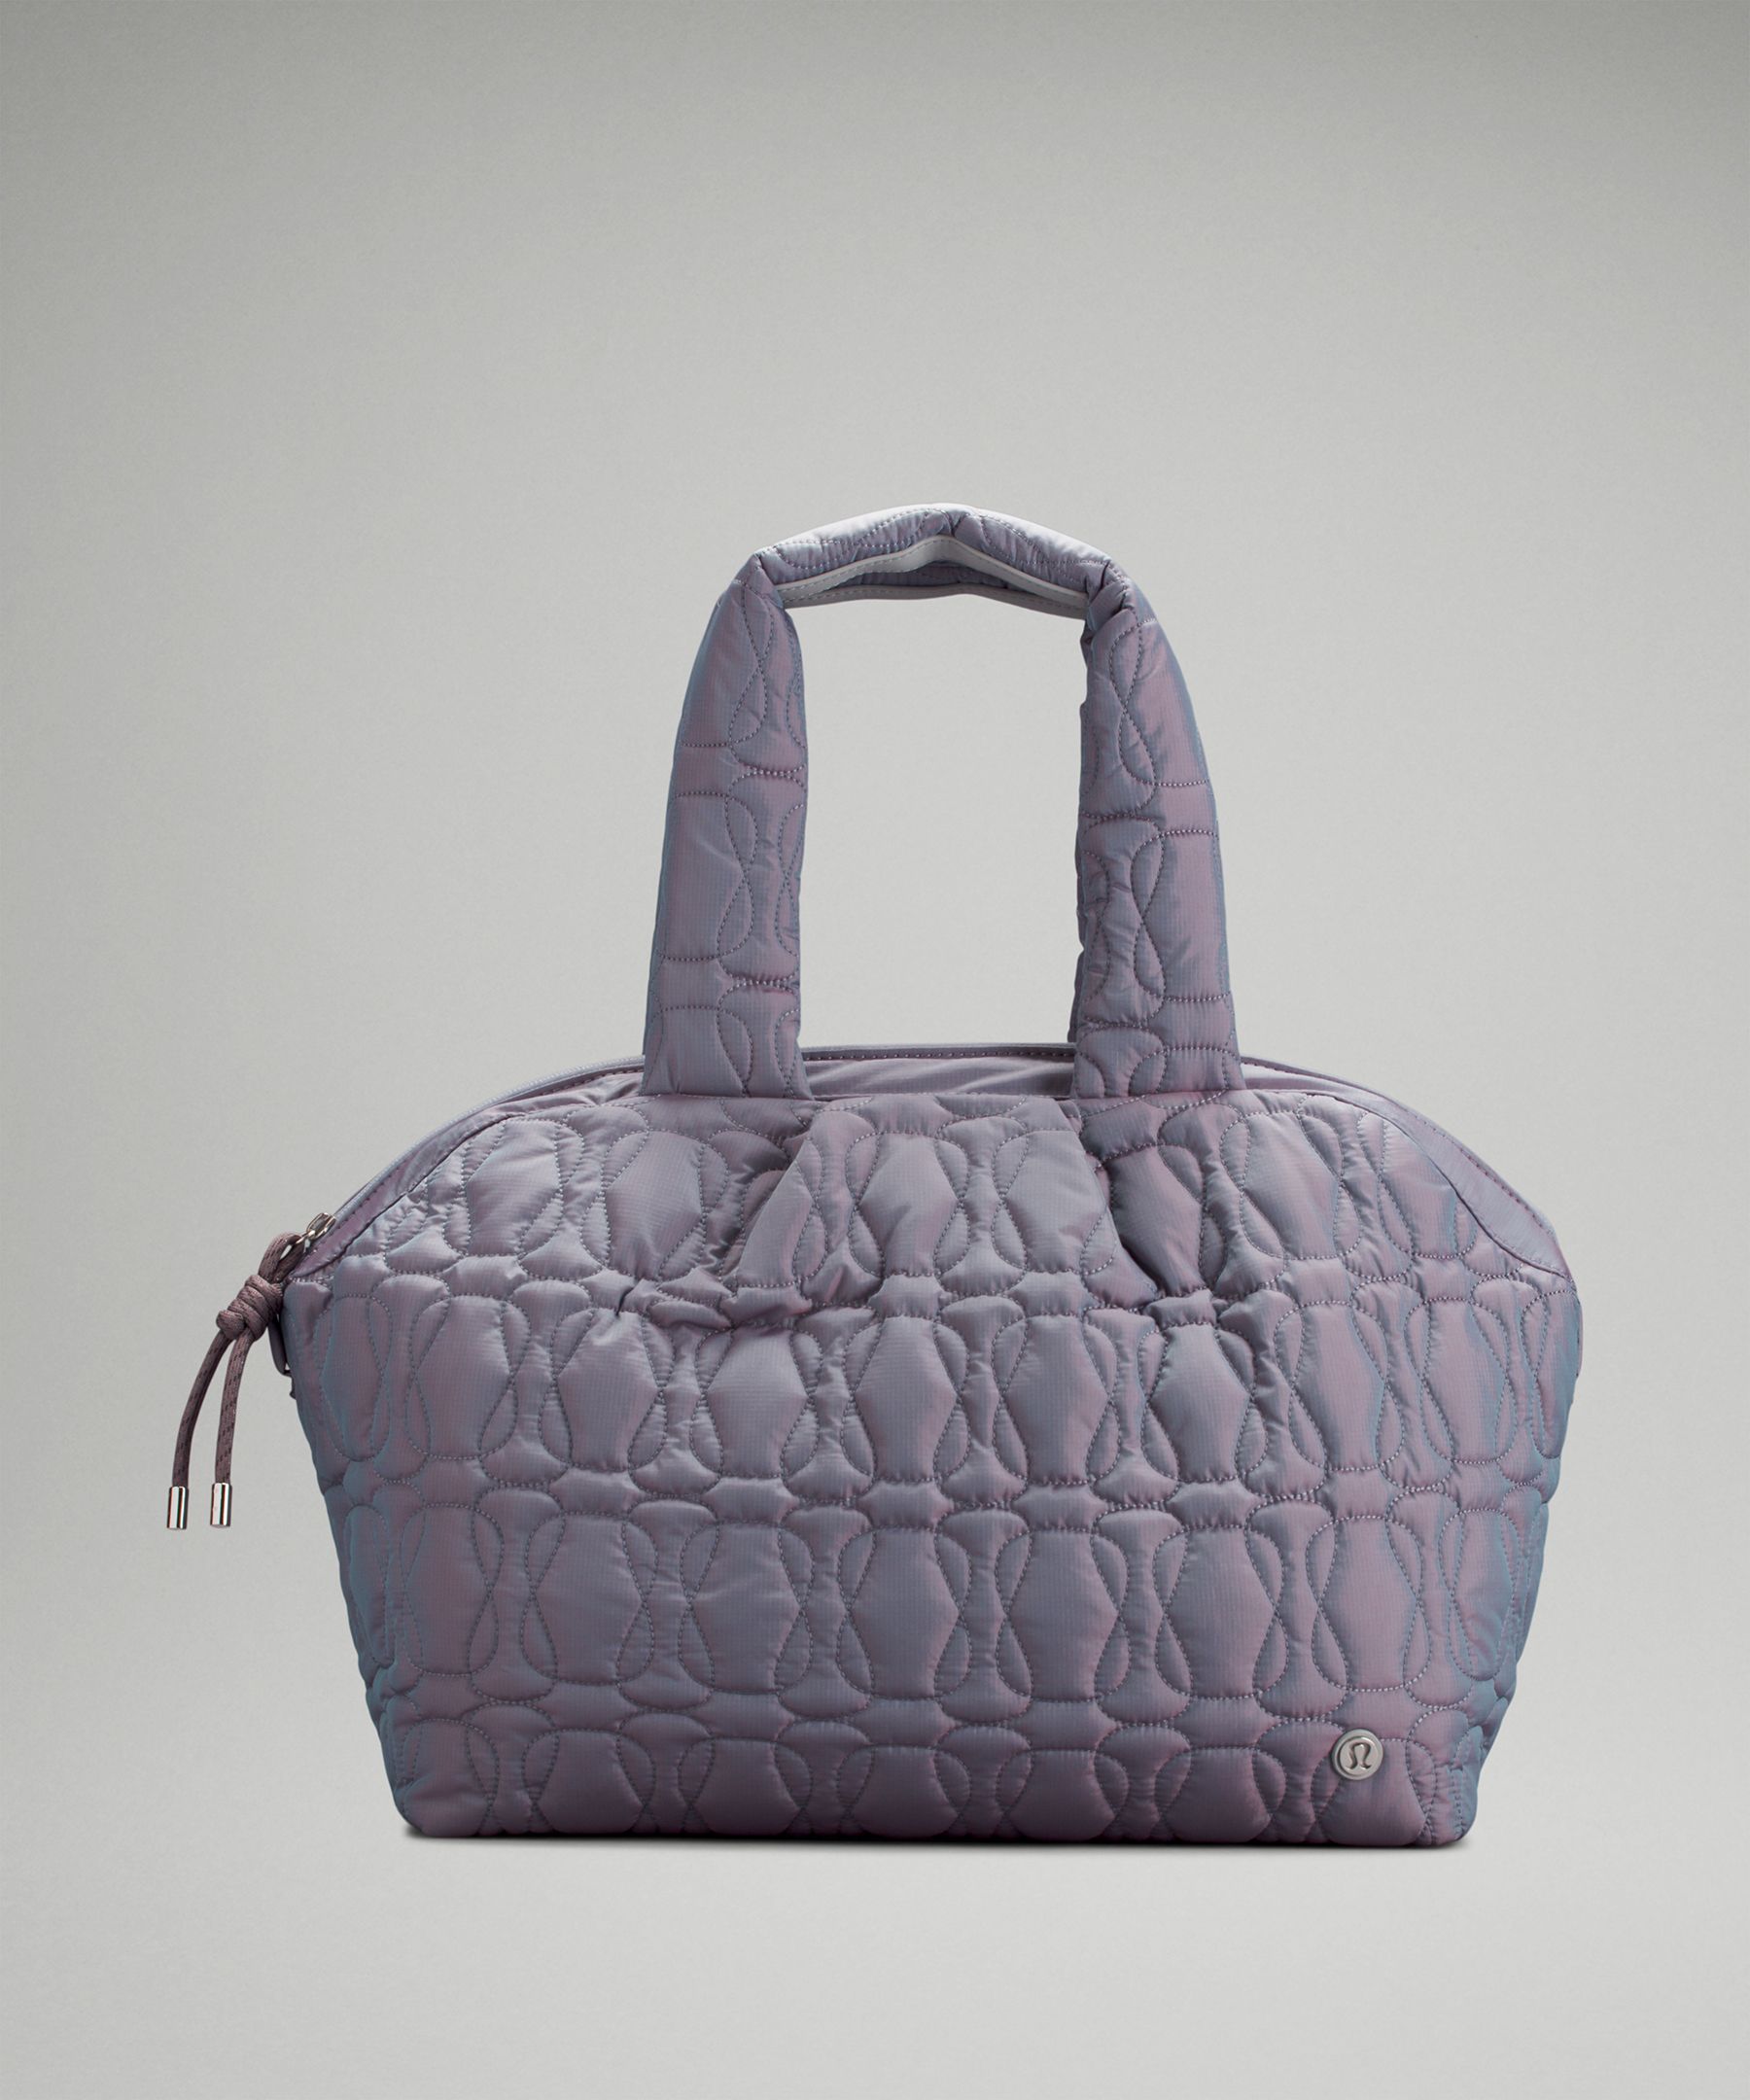 Lululemon Quilted Embrace Tote Bag 20l In Pink Taupe/icing Blue/rhino Grey